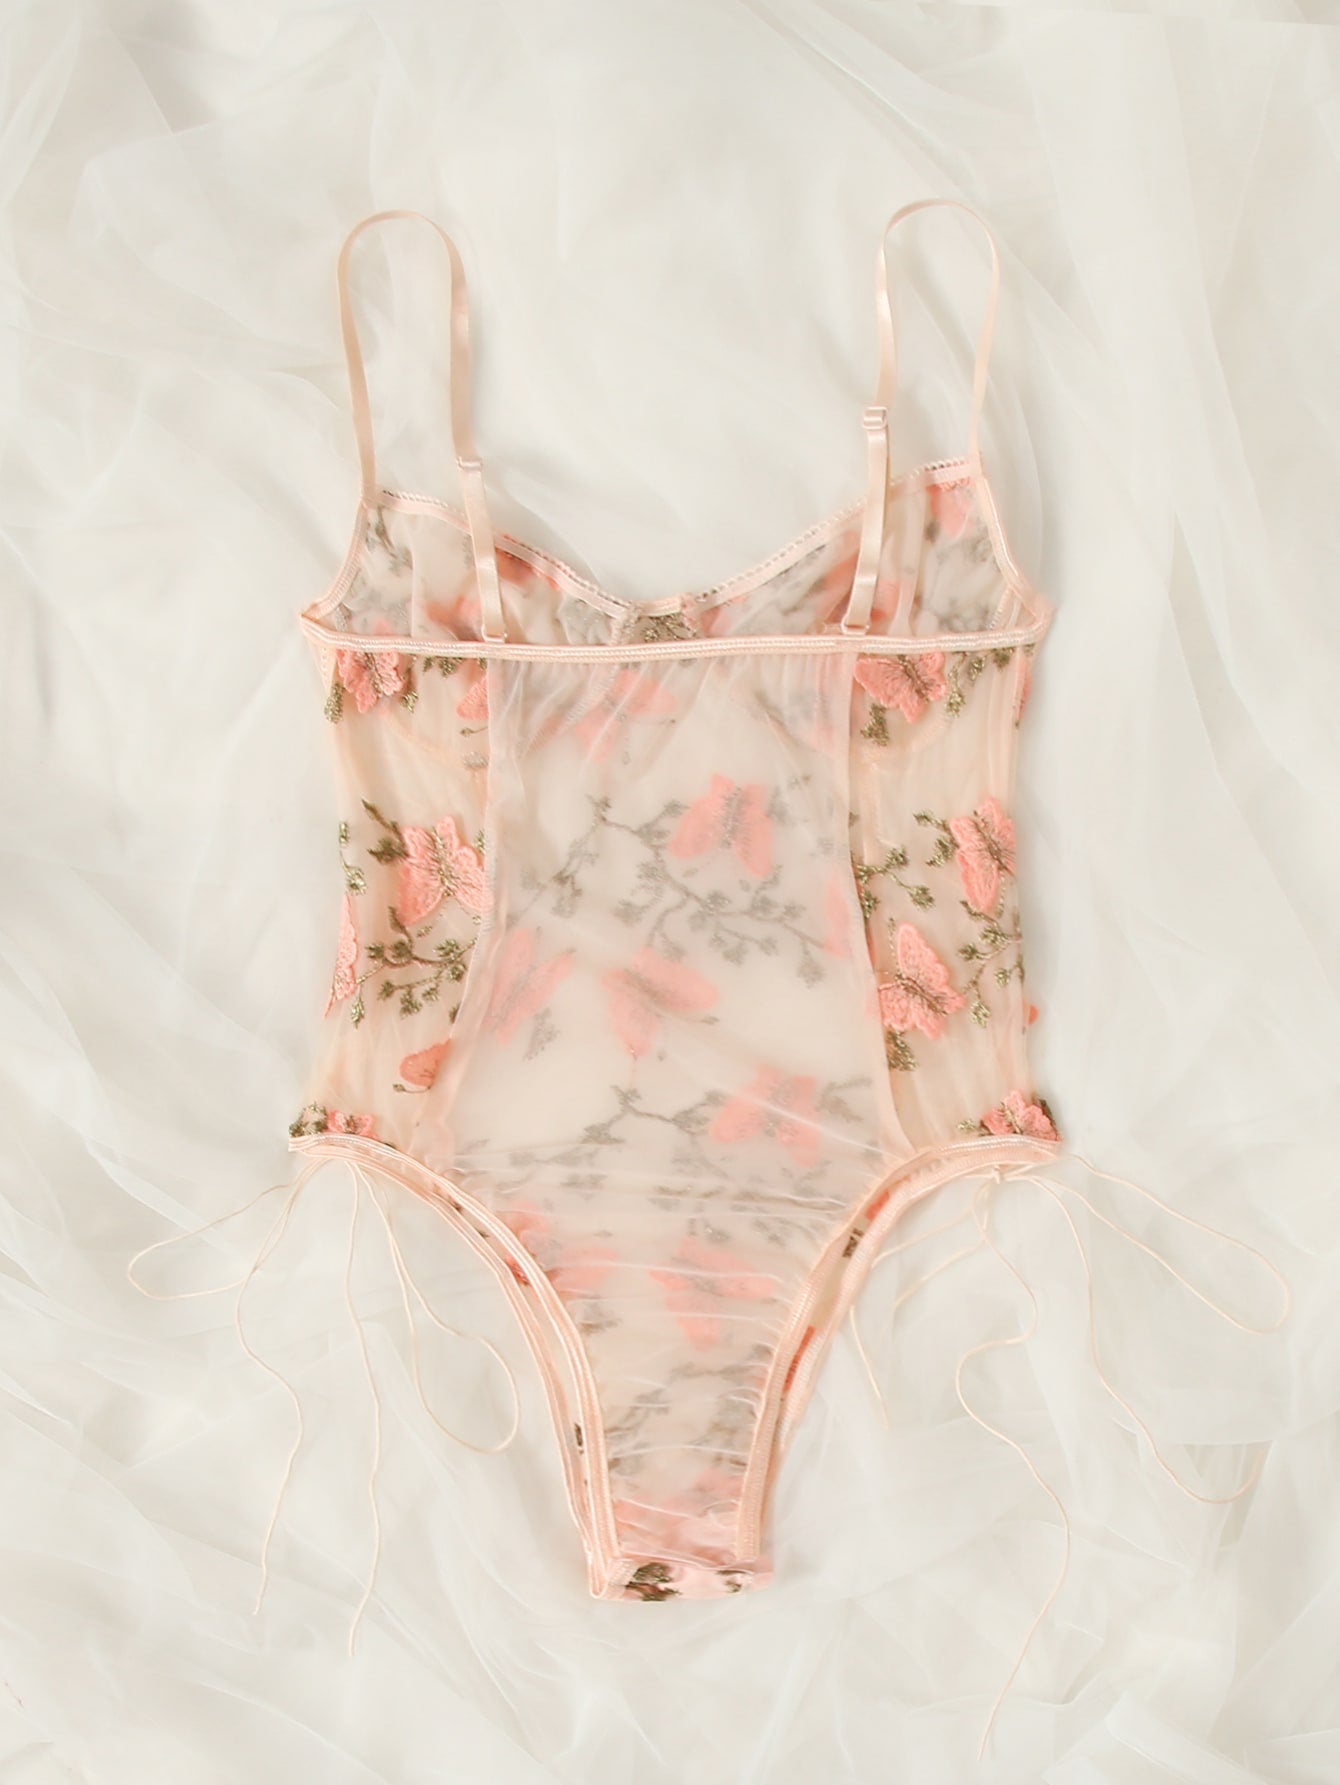 Butterfly Embroidered Mesh Teddy Bodysuit - Negative Apparel